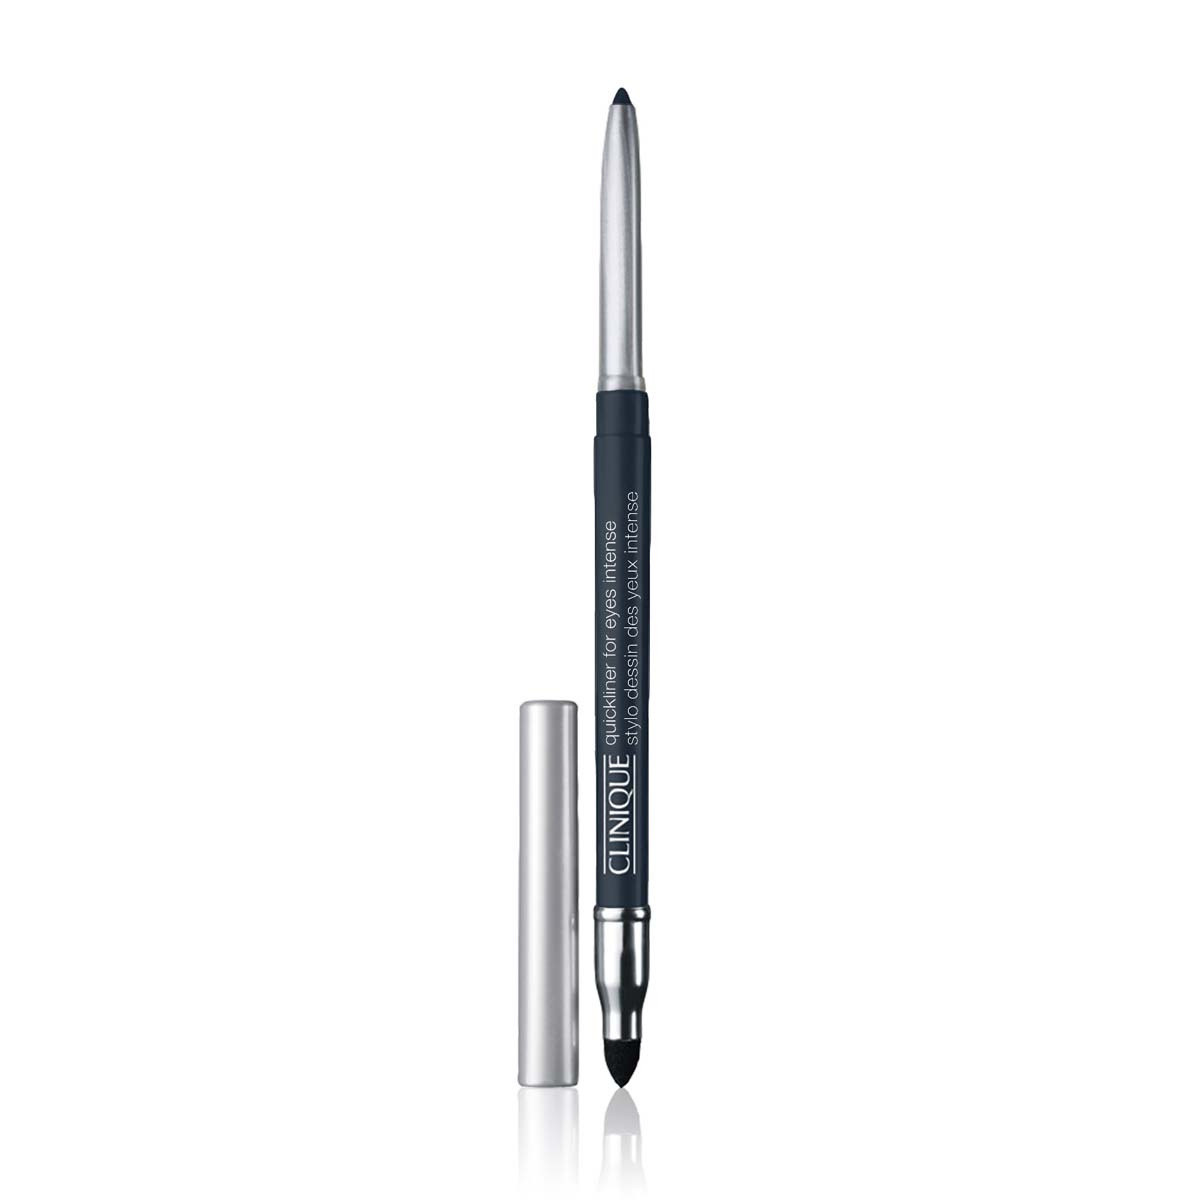 Clinique quickliner for eyes intense - 08 intense midnight 0,28 g, 08 INTENSE MIDNIGHT, large image number 0